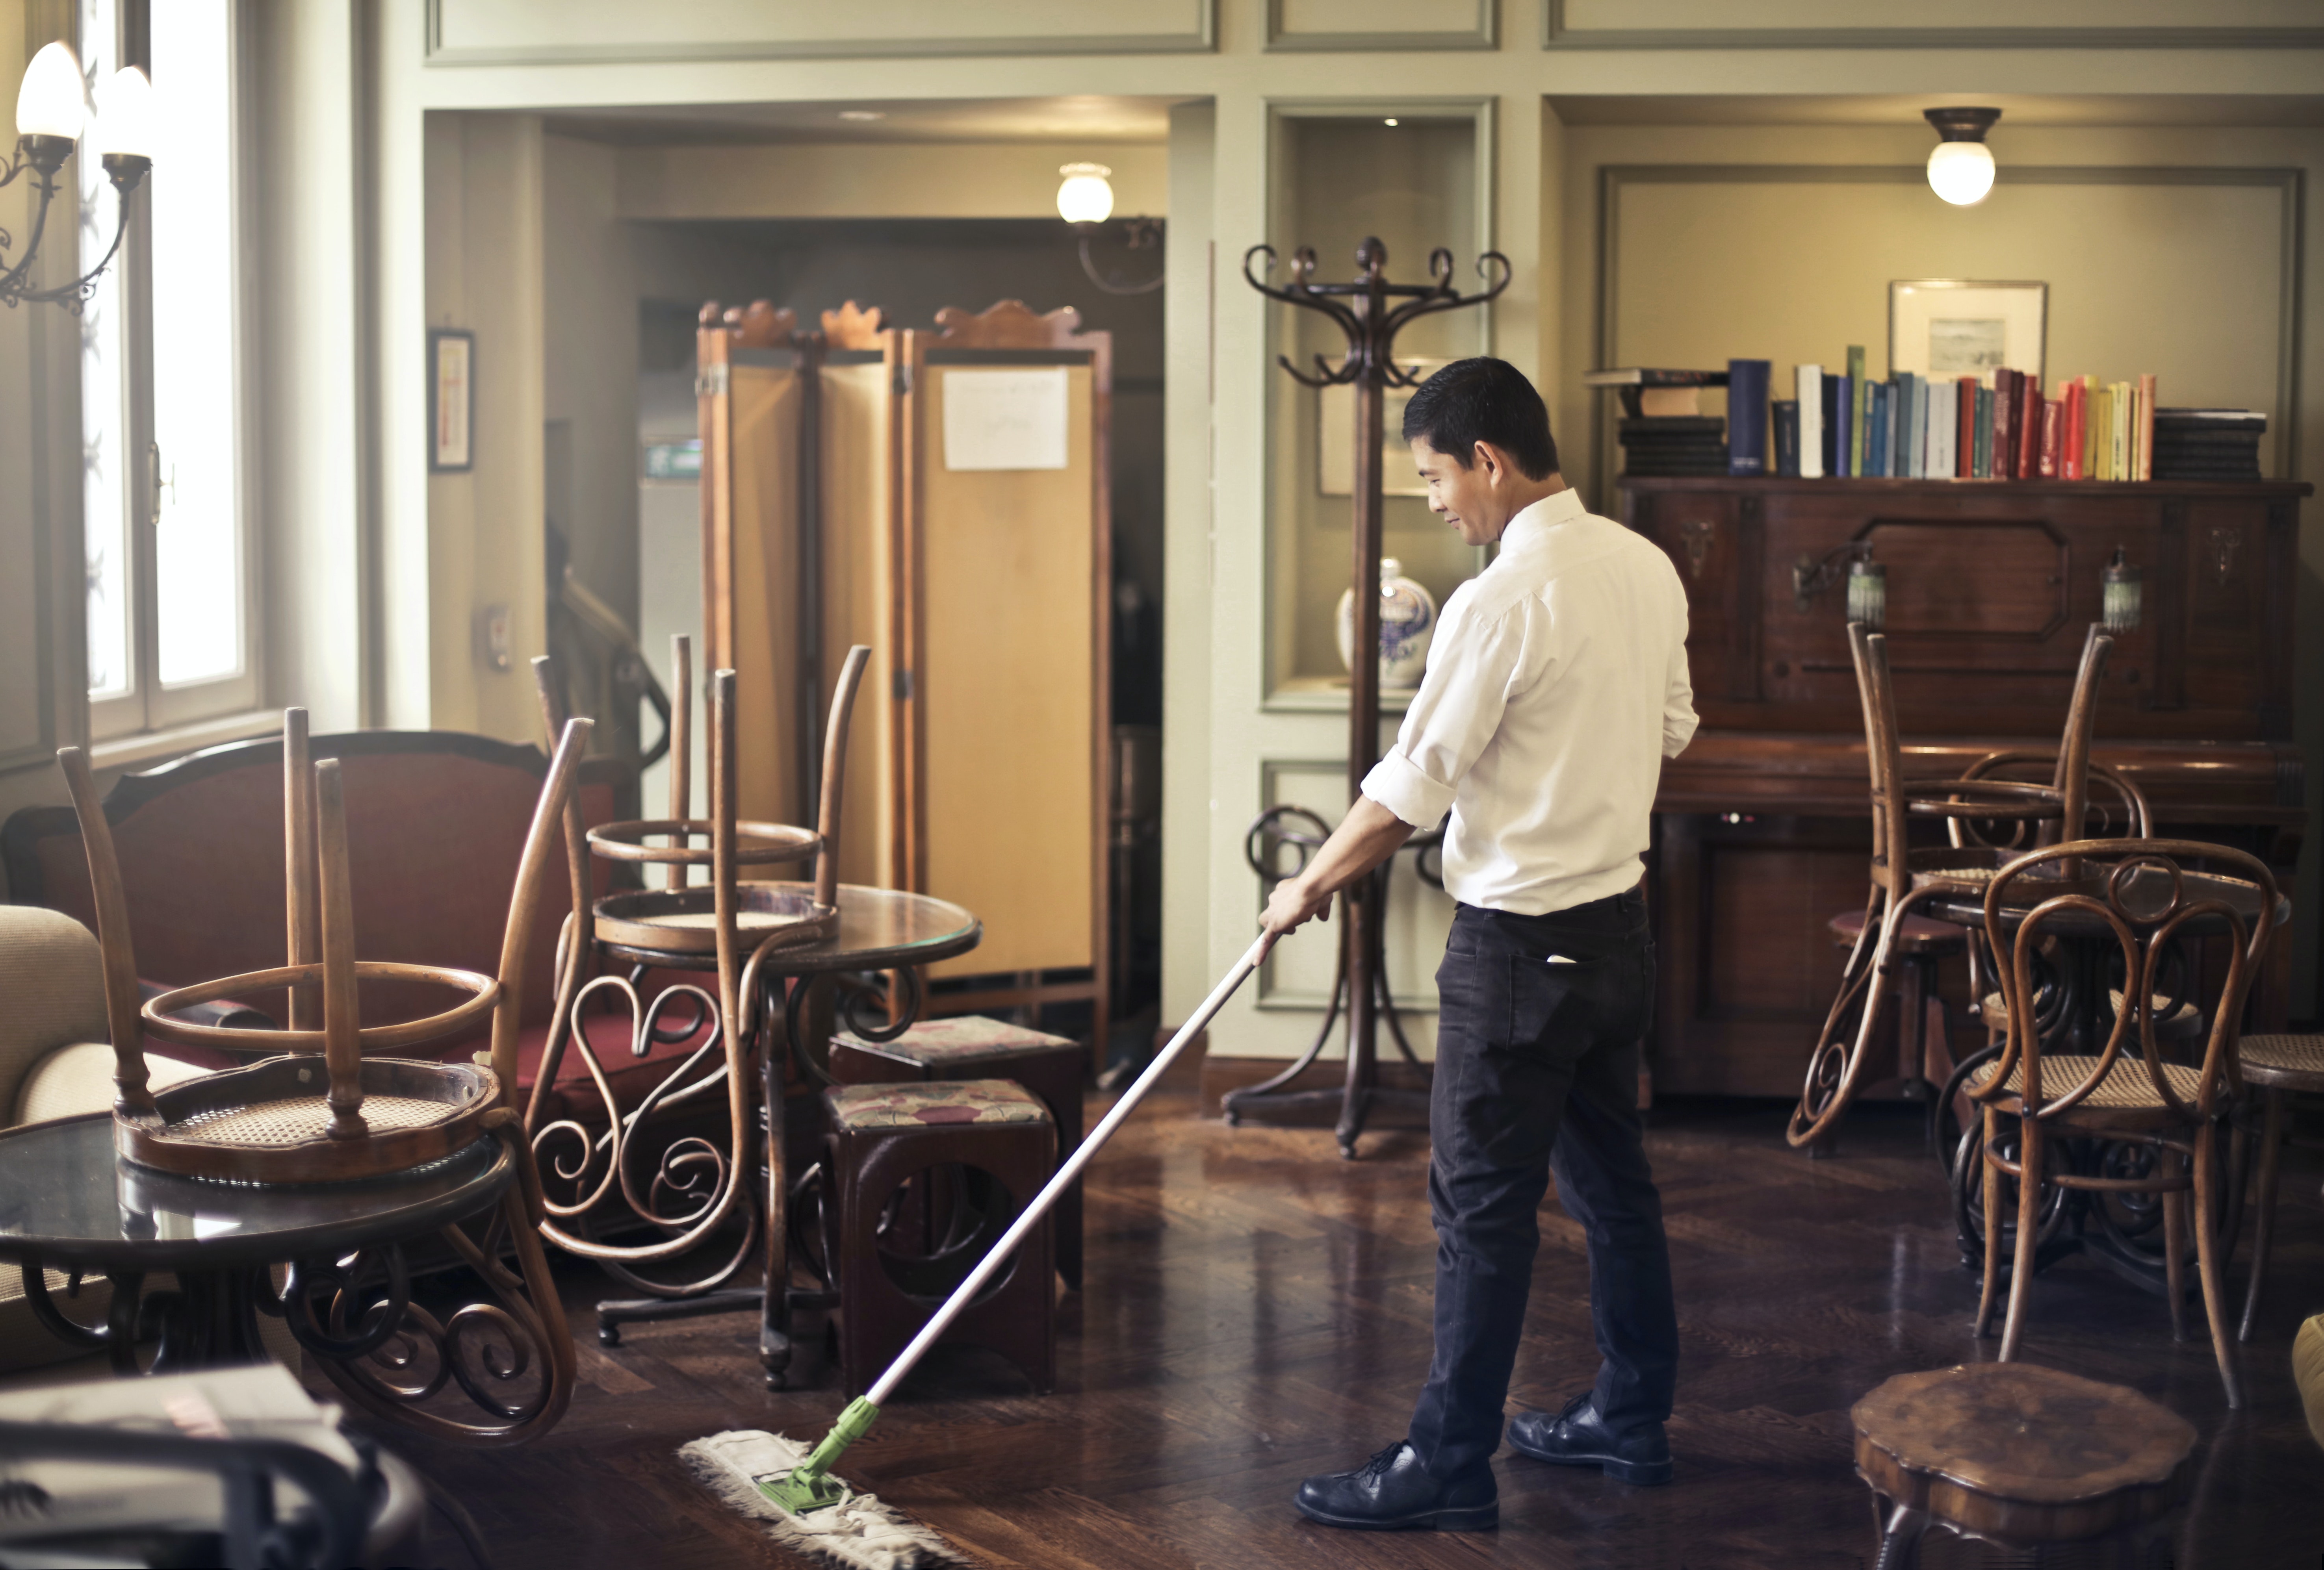 professional cleaner mopping a wooden floor in a retro-looking parlor